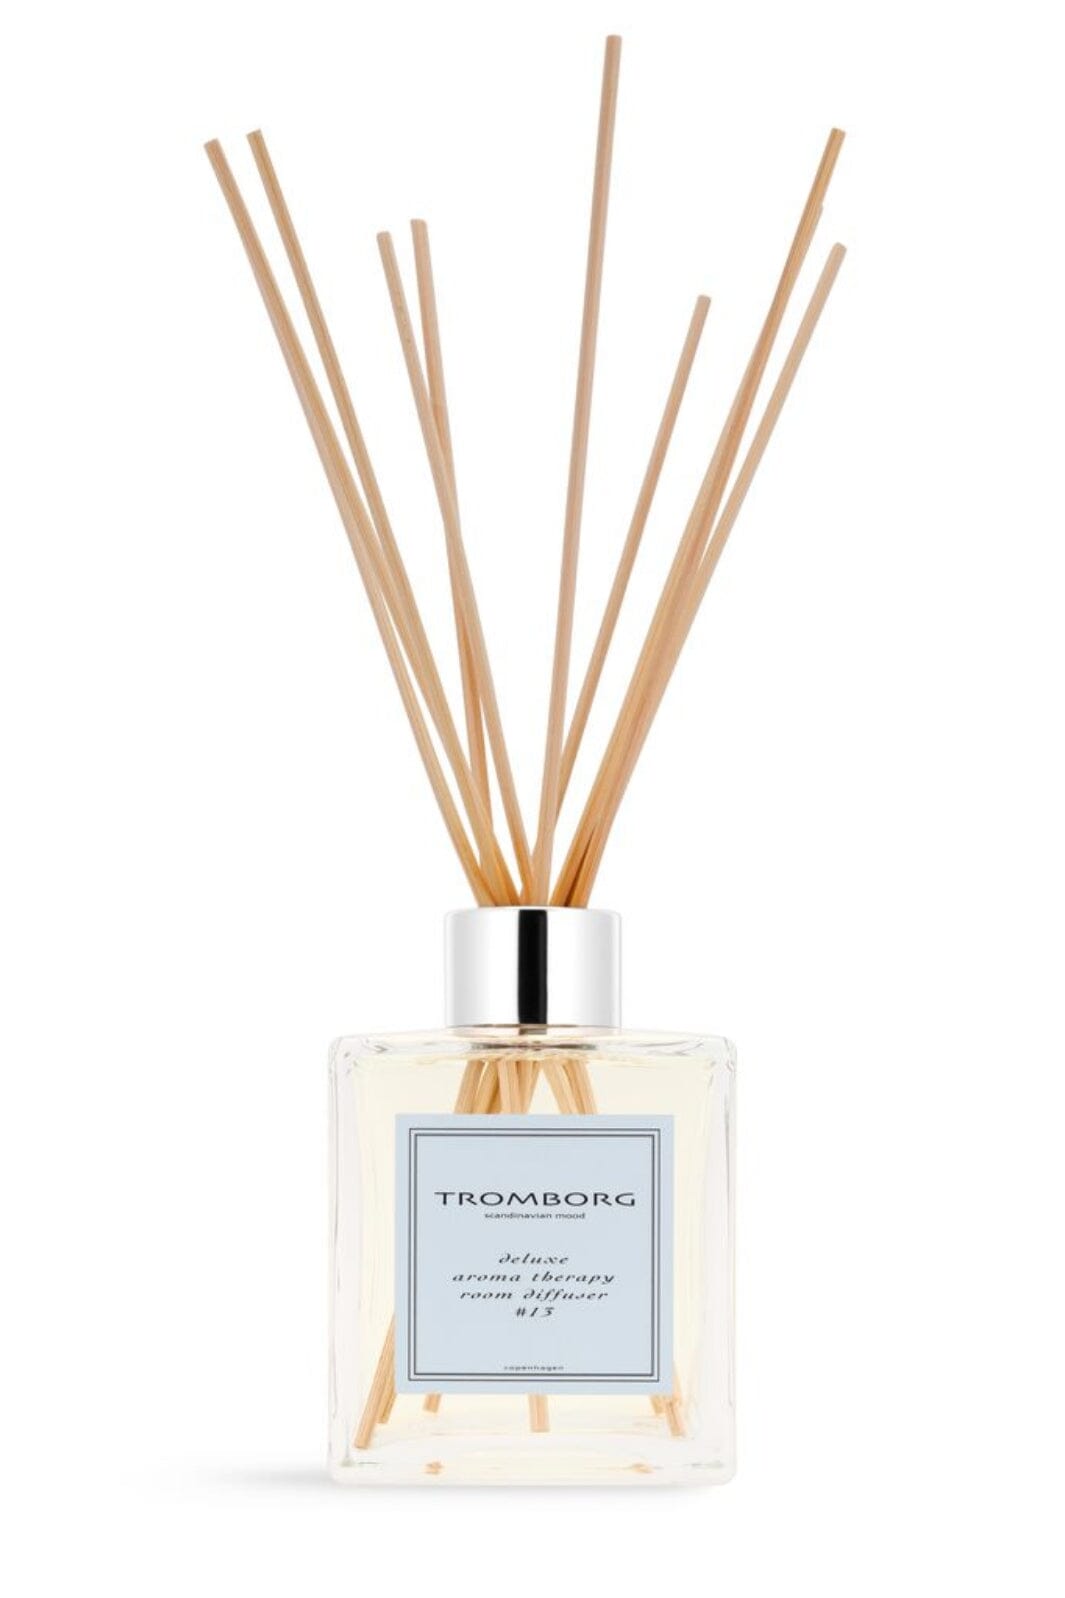 Tromborg - Aroma Therapy Room Diffuser #13 Duftfrisker 